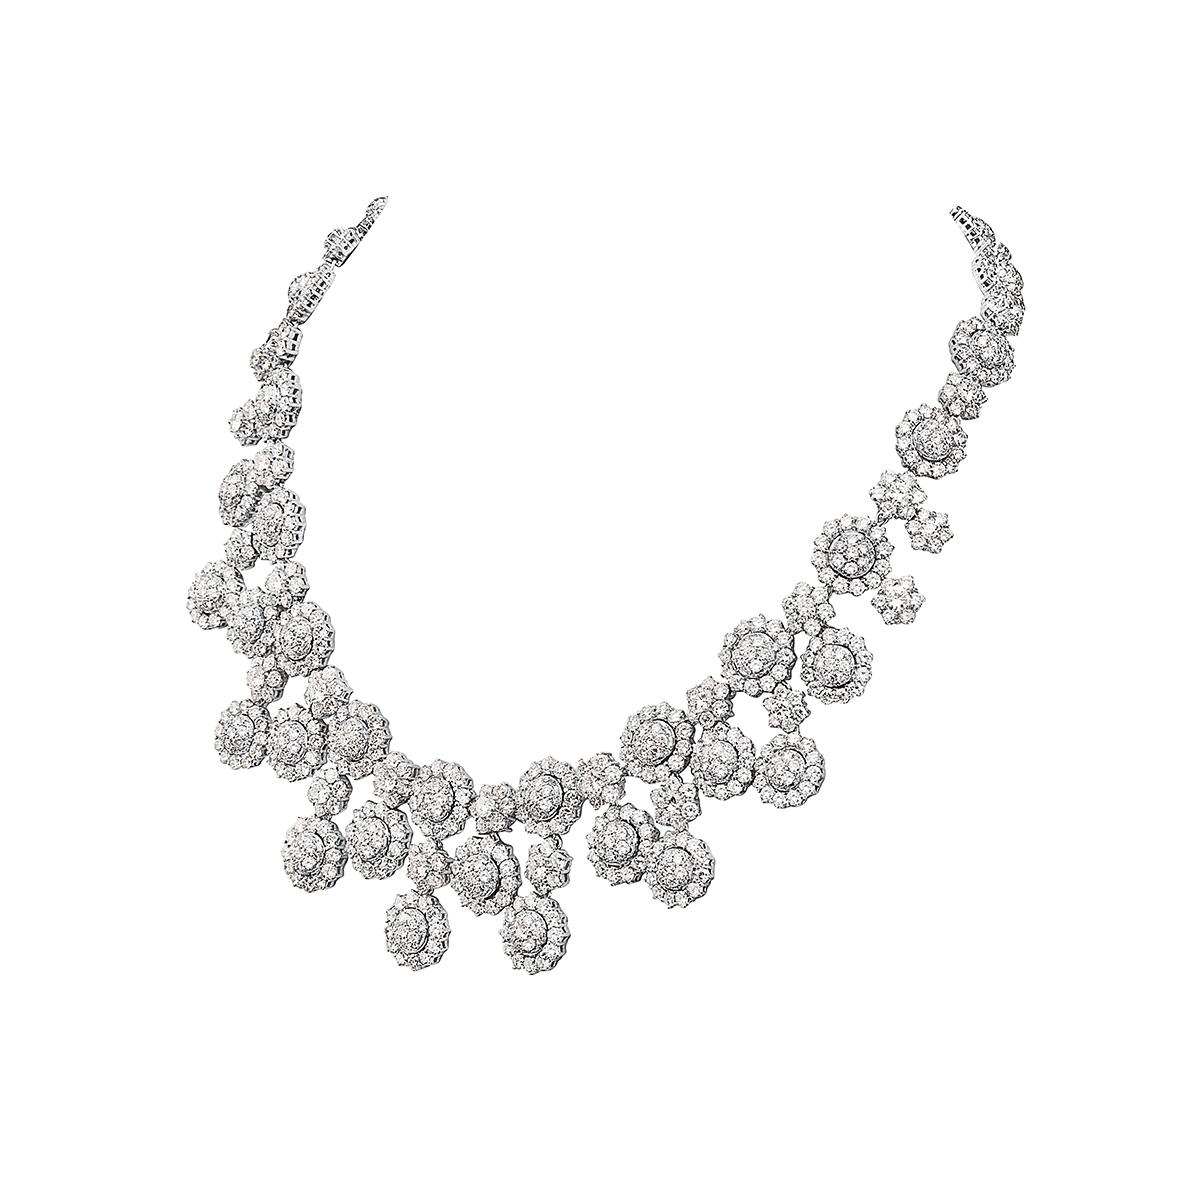 This necklace features 56.18 carats of G-H VS round diamonds set in 18K white gold. 8 inch drop. This necklace was made in Italy with the highest quality standards of craftsmanship and is extremely flexible with a comfort fit. 

Viewings available